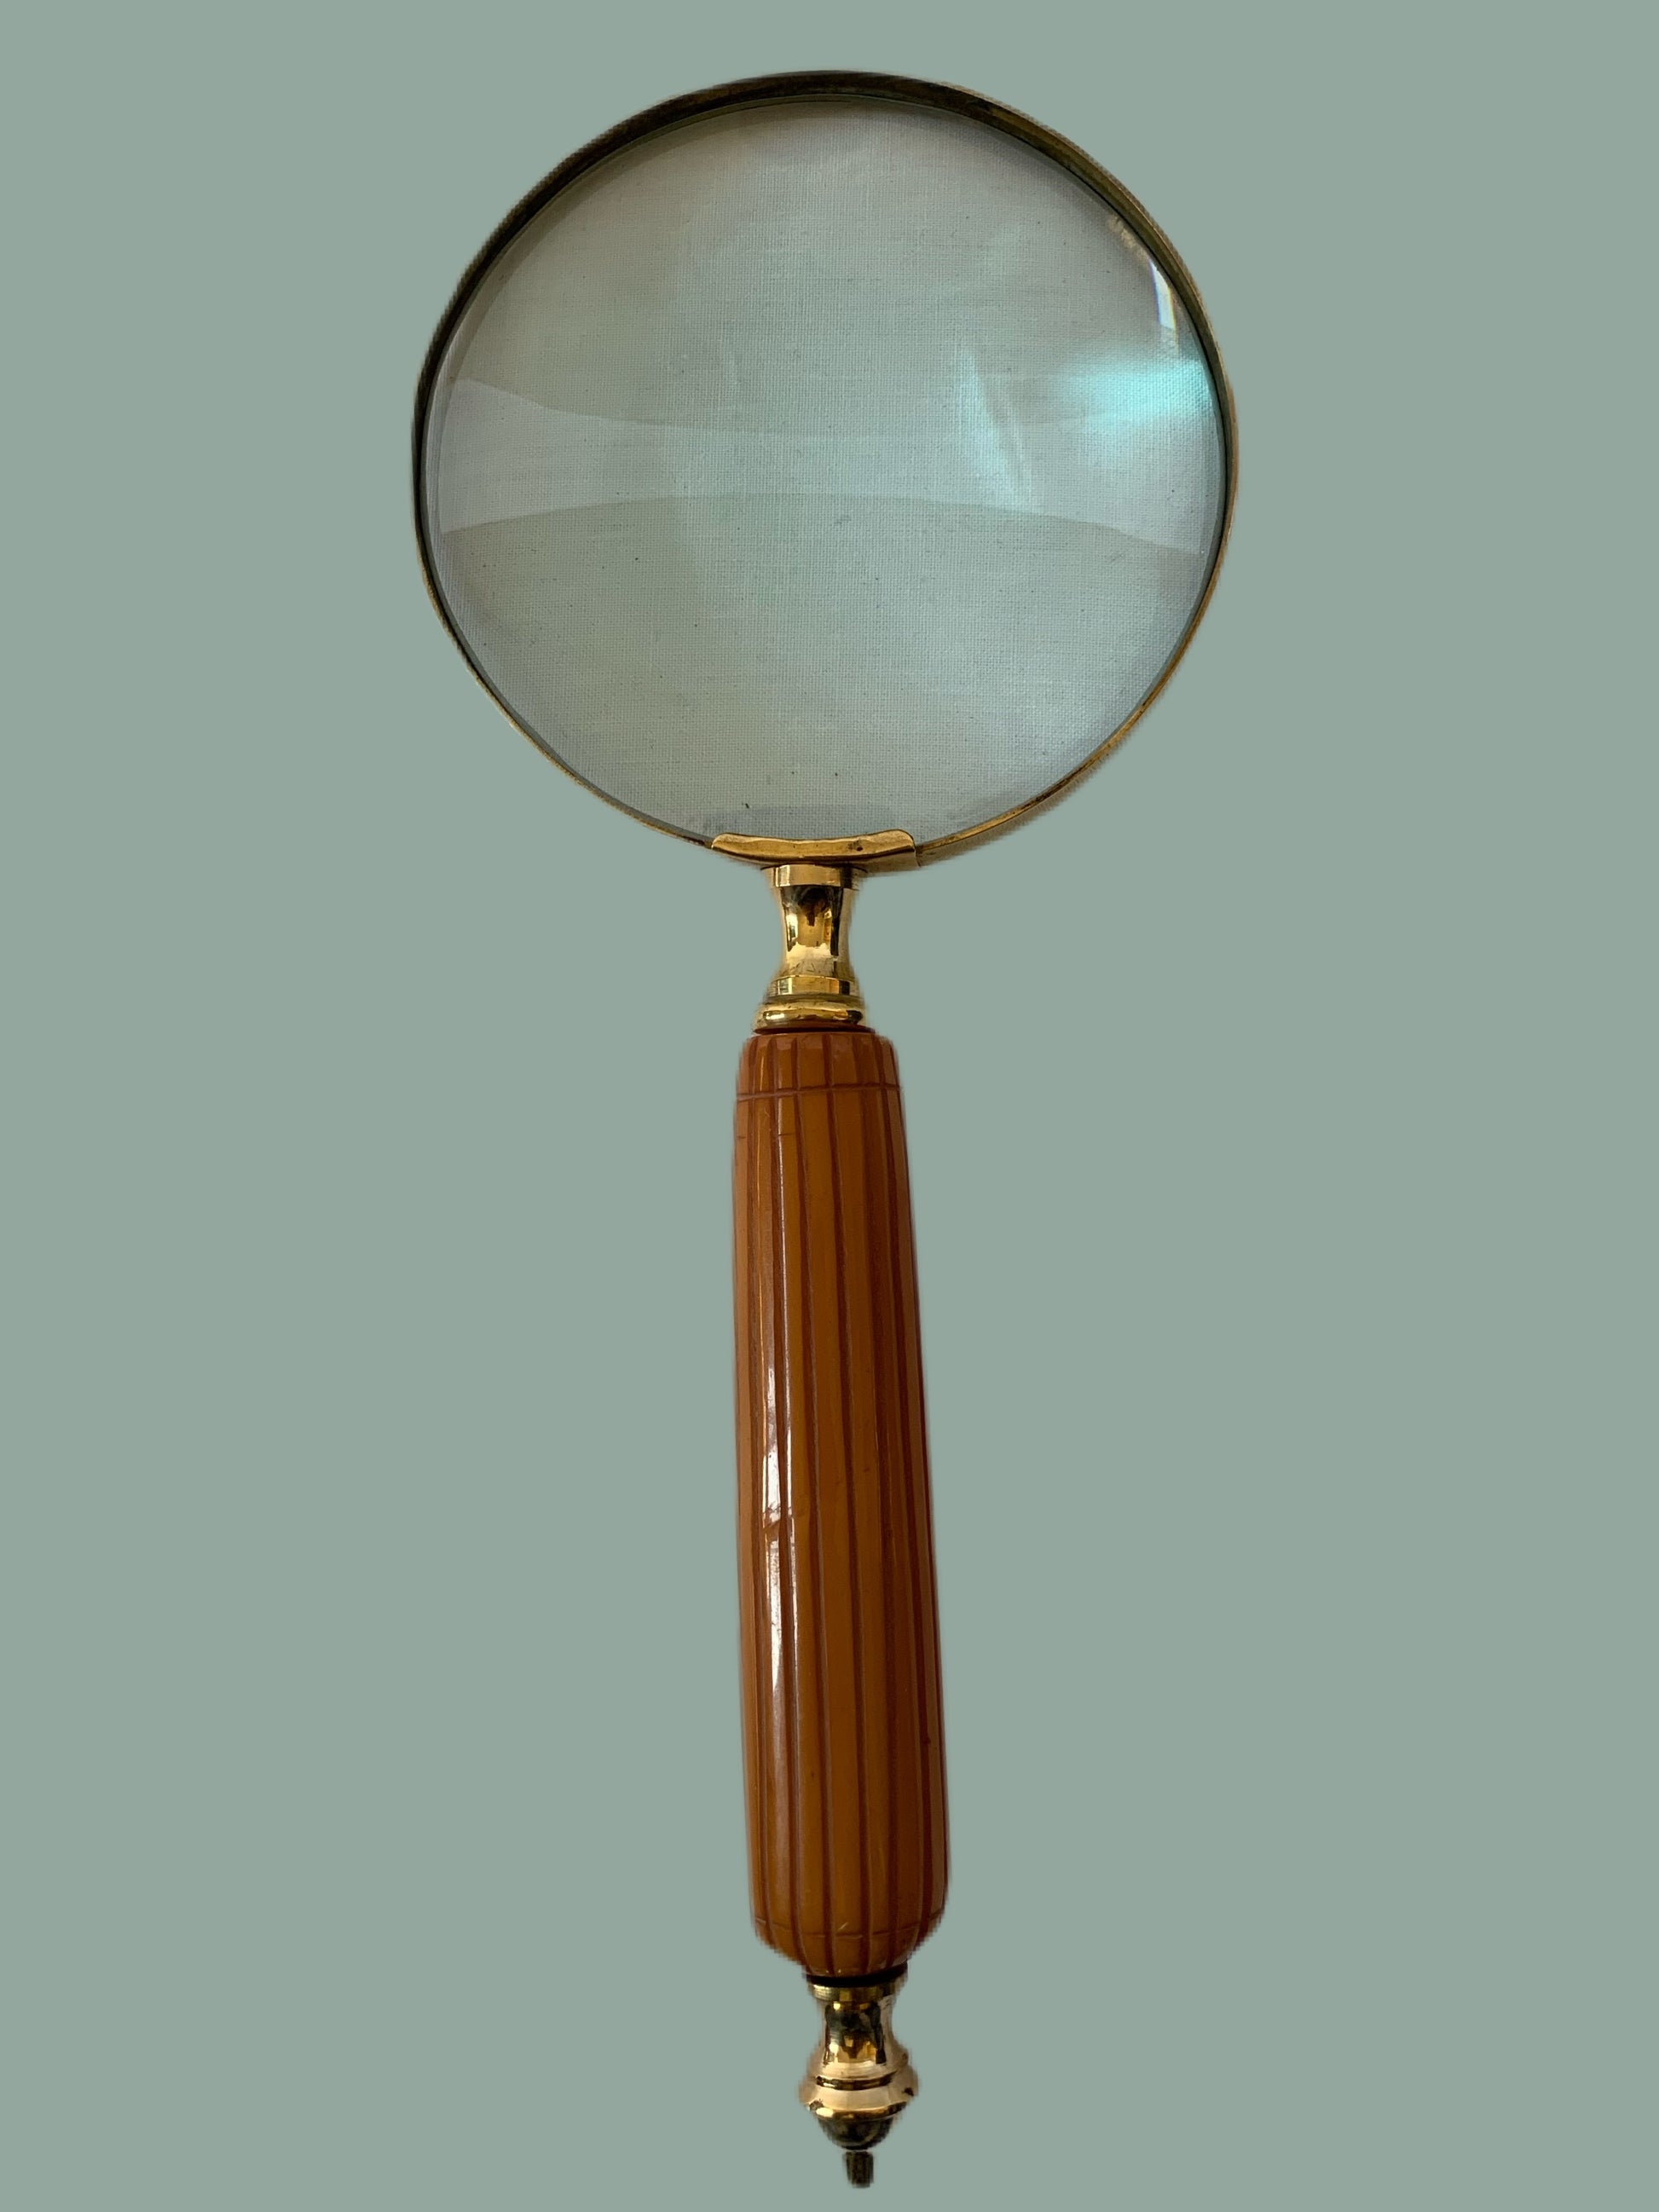 Brown magnifier